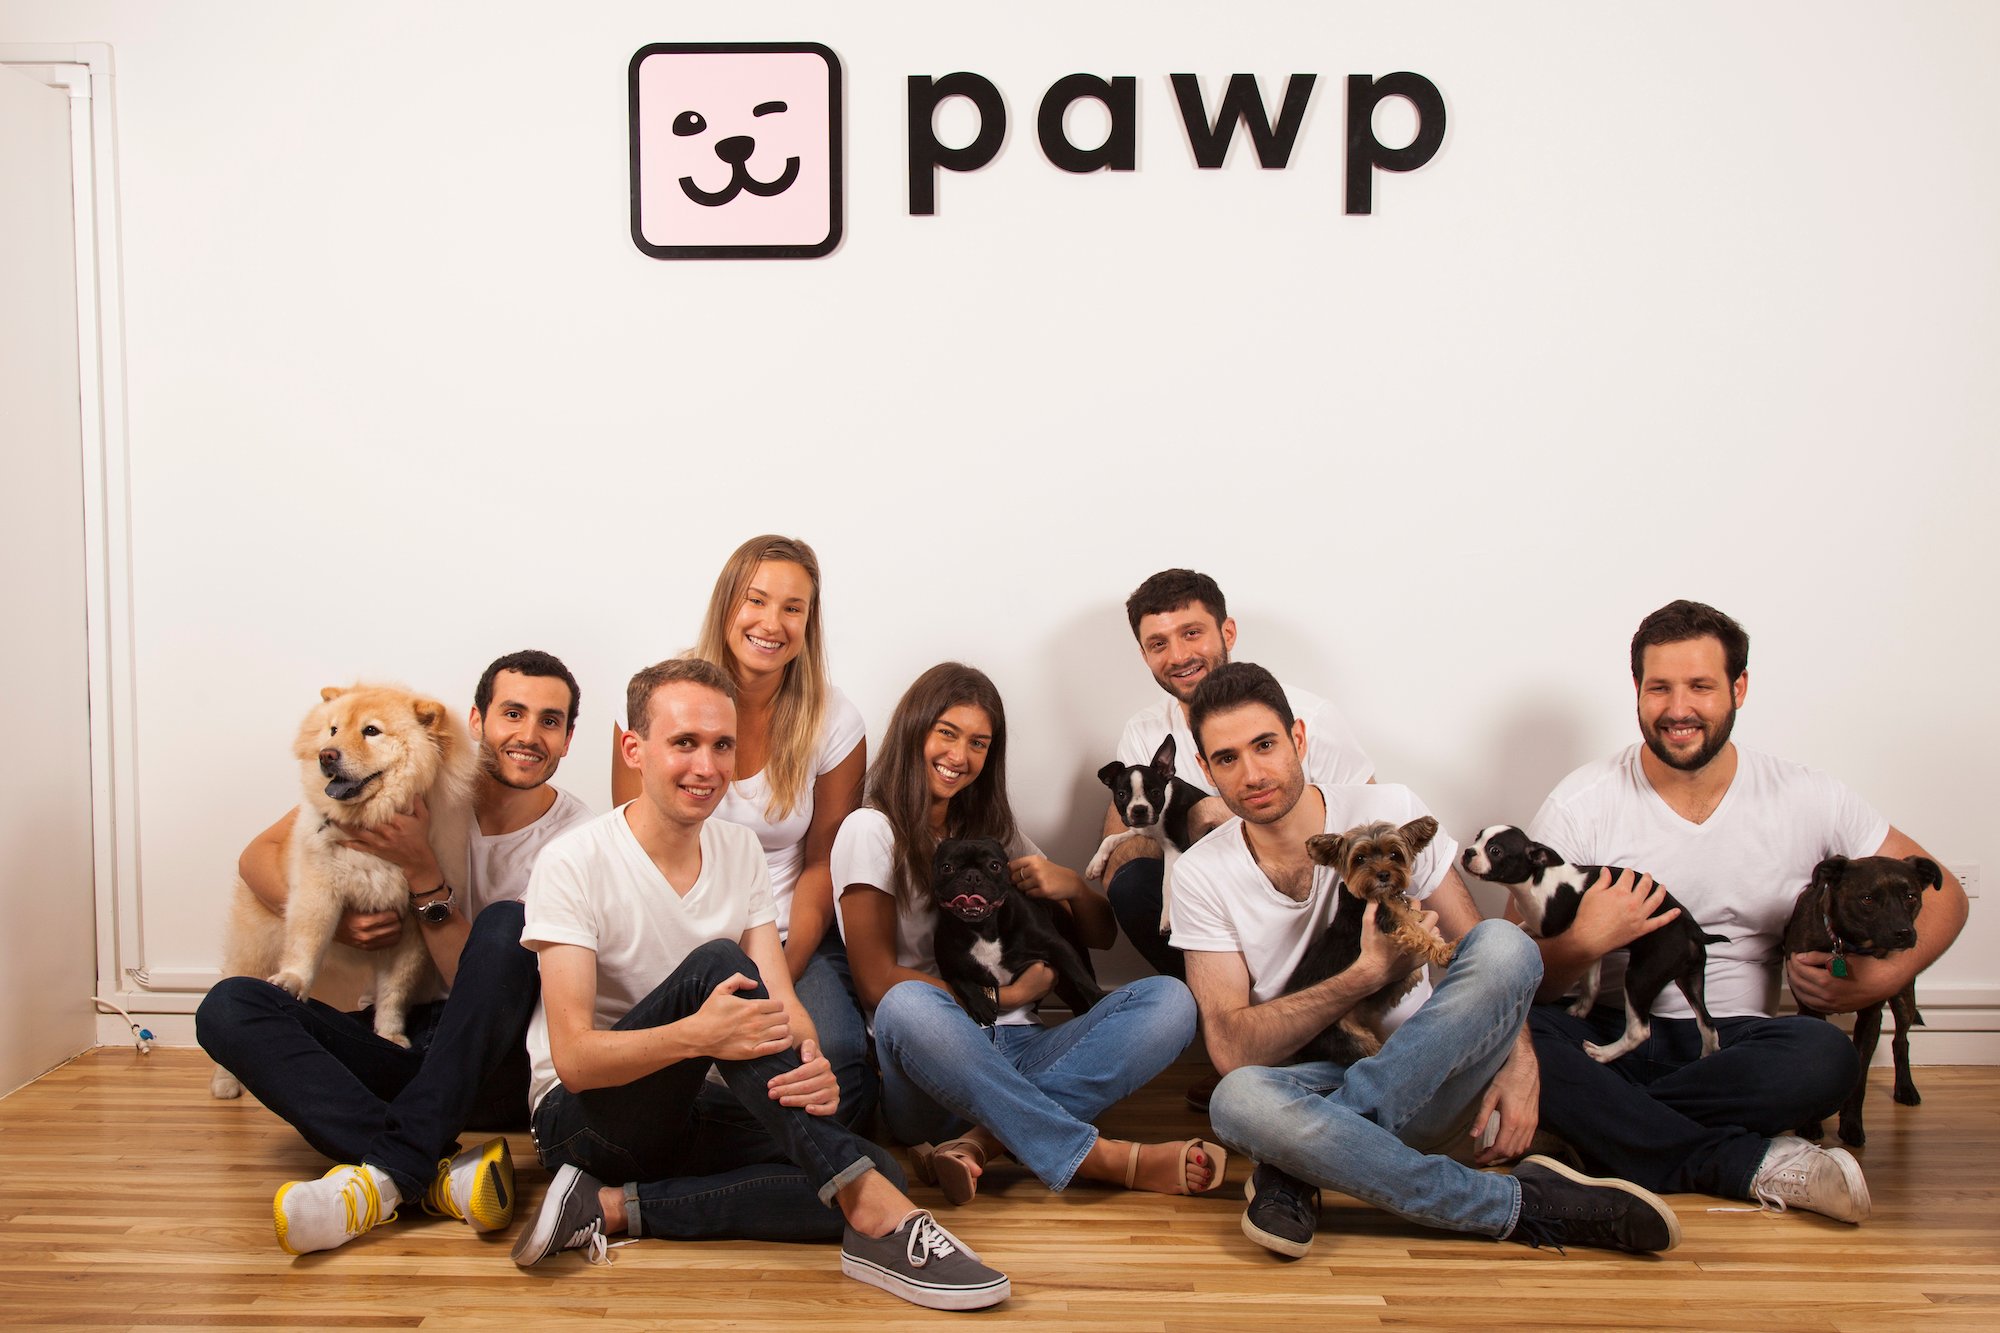 team of people with puppies